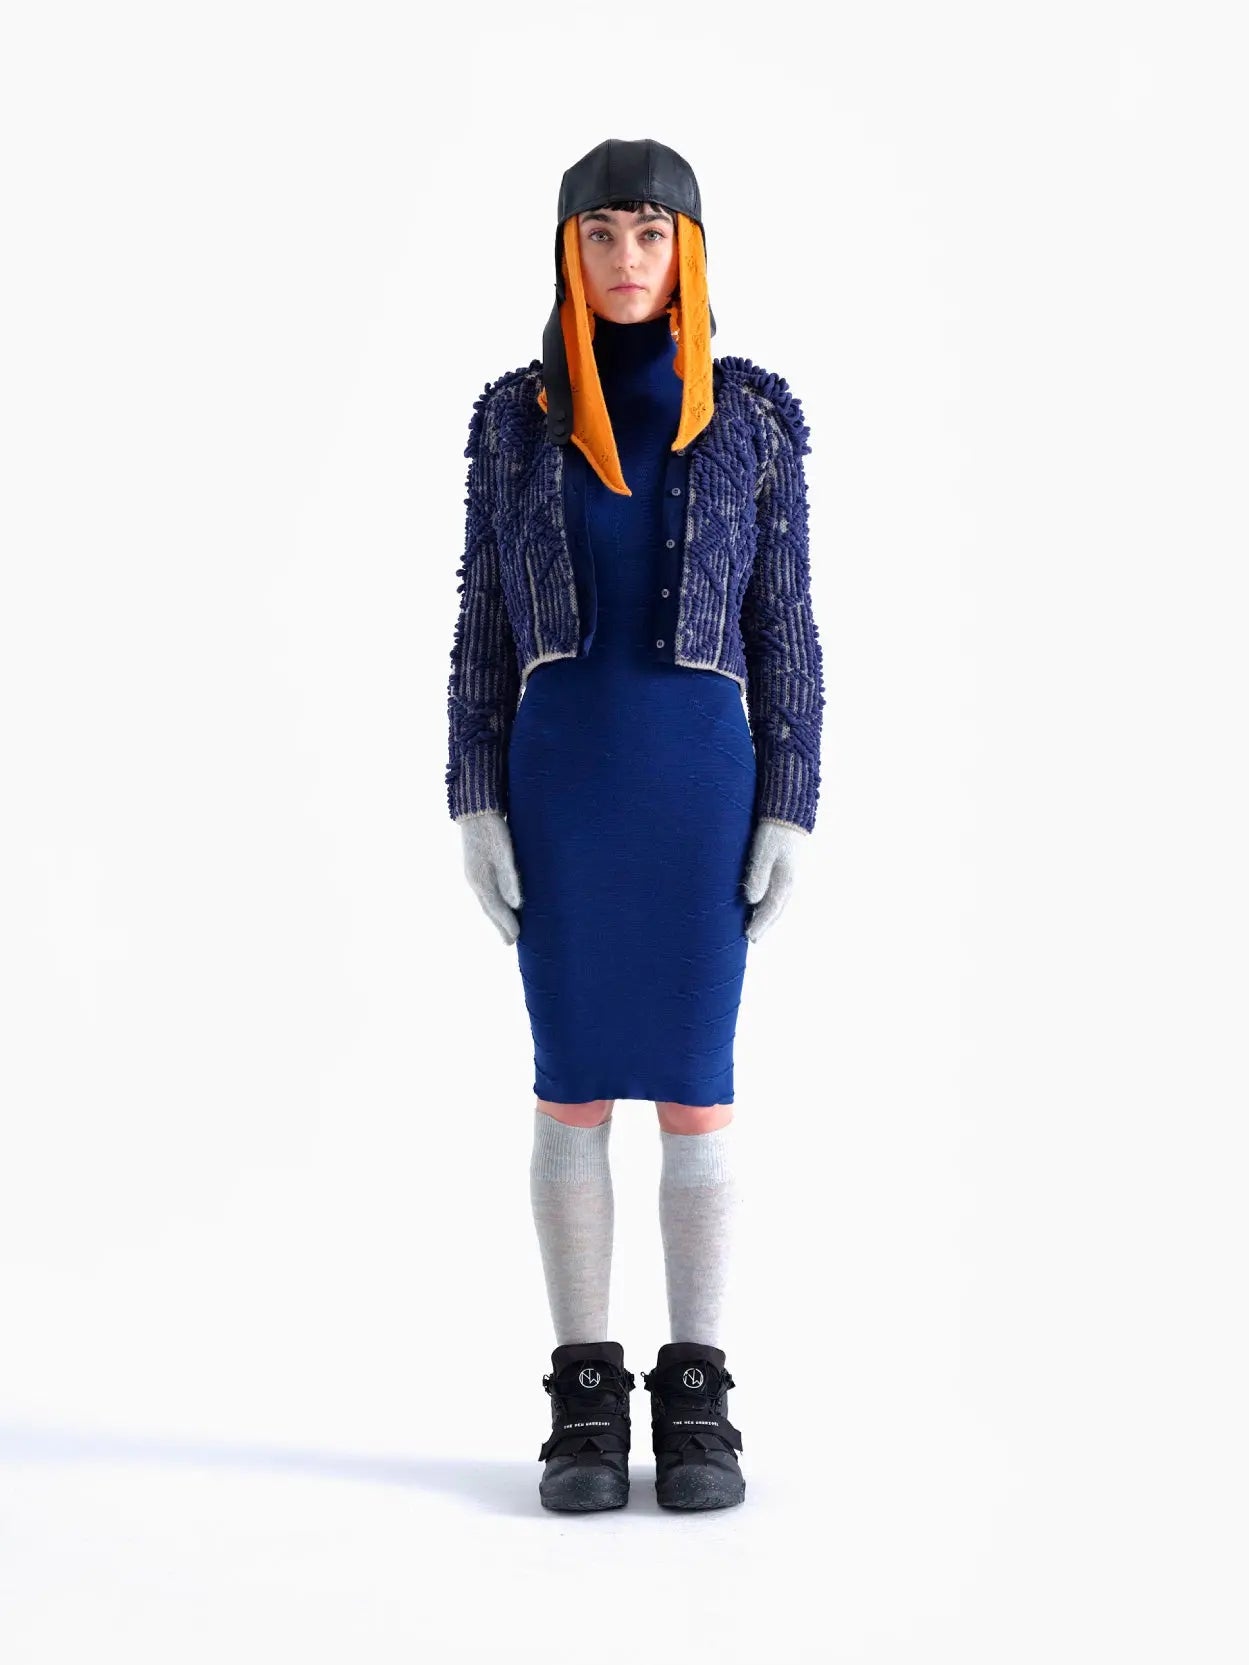 A person is standing against a white background wearing a blue textured jacket, a Rai Dress Navy by Bielo, gray gloves, gray knee-high socks, black boots, and a unique hat with orange ear flaps that cover the sides of their face. They are facing forward with a neutral expression, looking like they just stepped out of an exclusive Barcelona store.